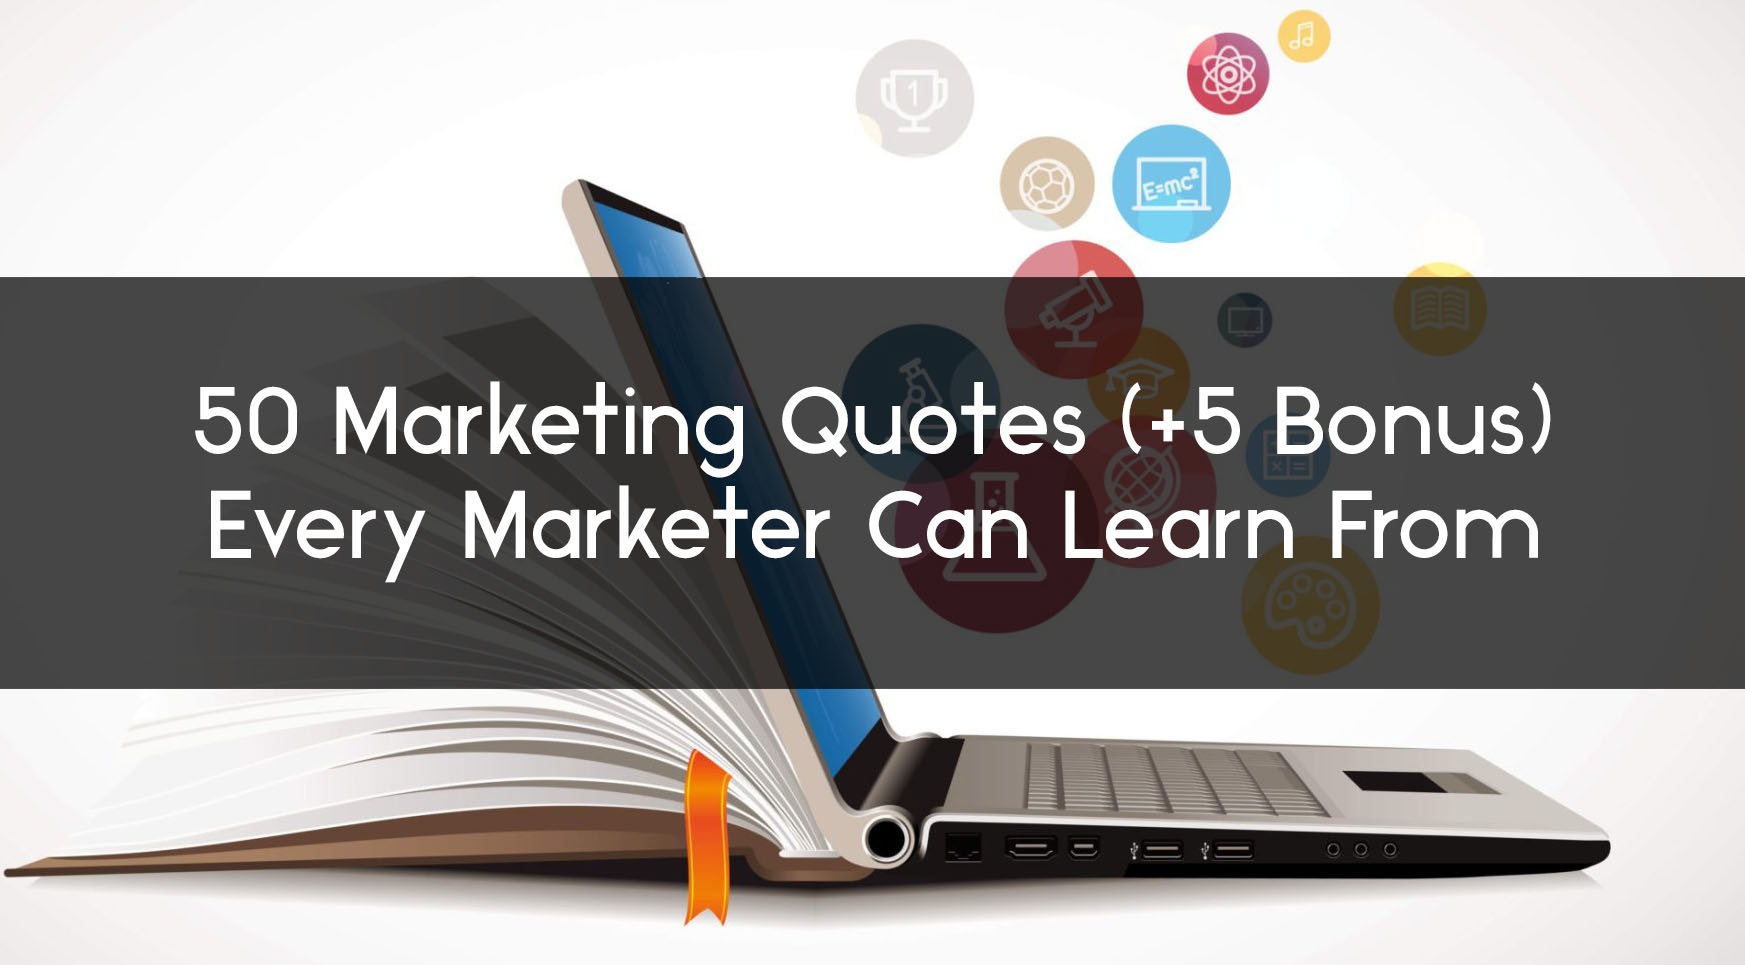 50 Marketing Quotes 5 Bonus Every Marketer Can Learn From